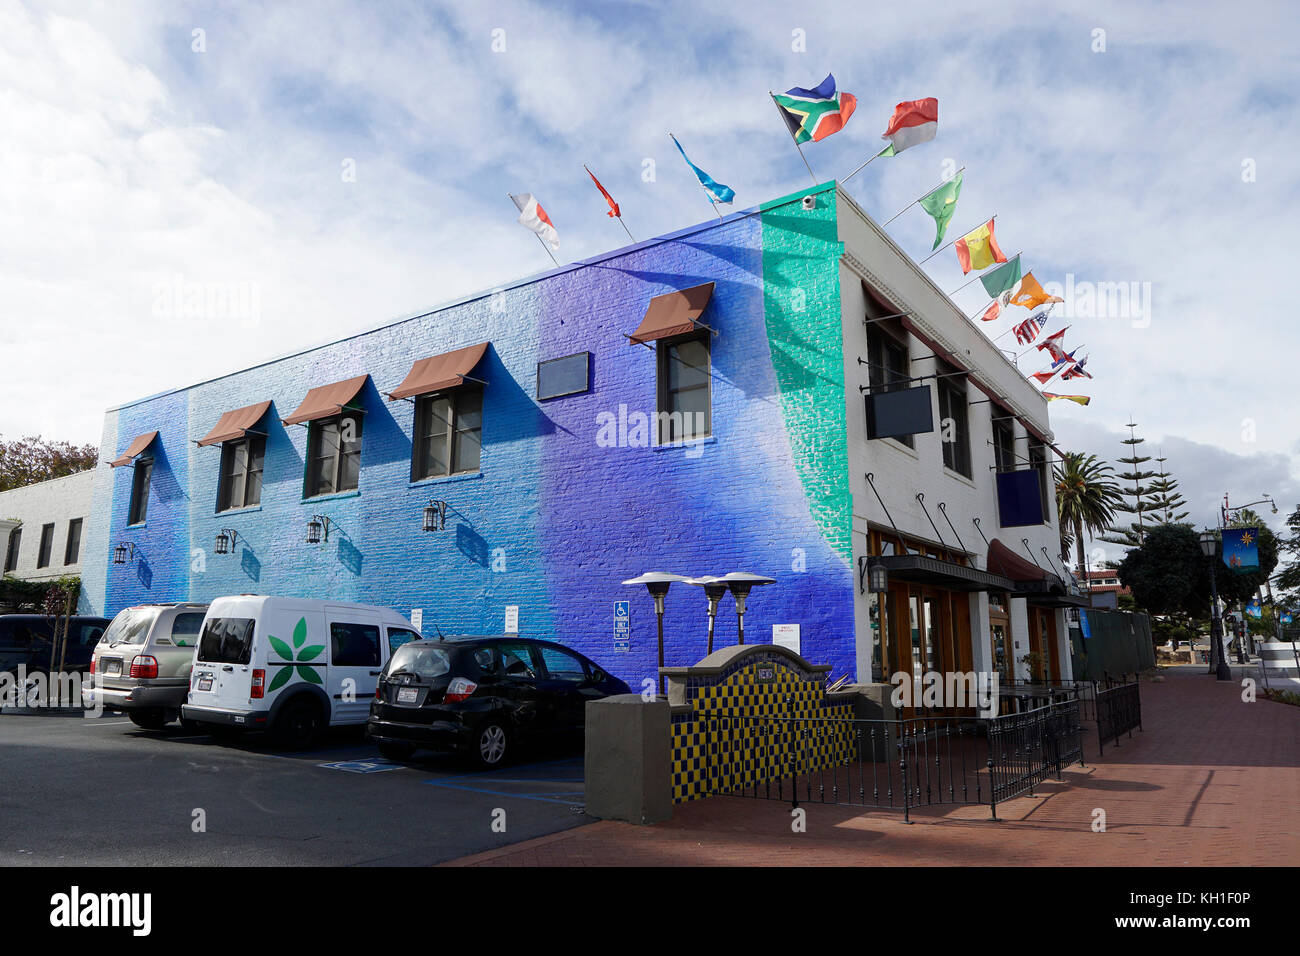 Colorful building with flags Stock Photo